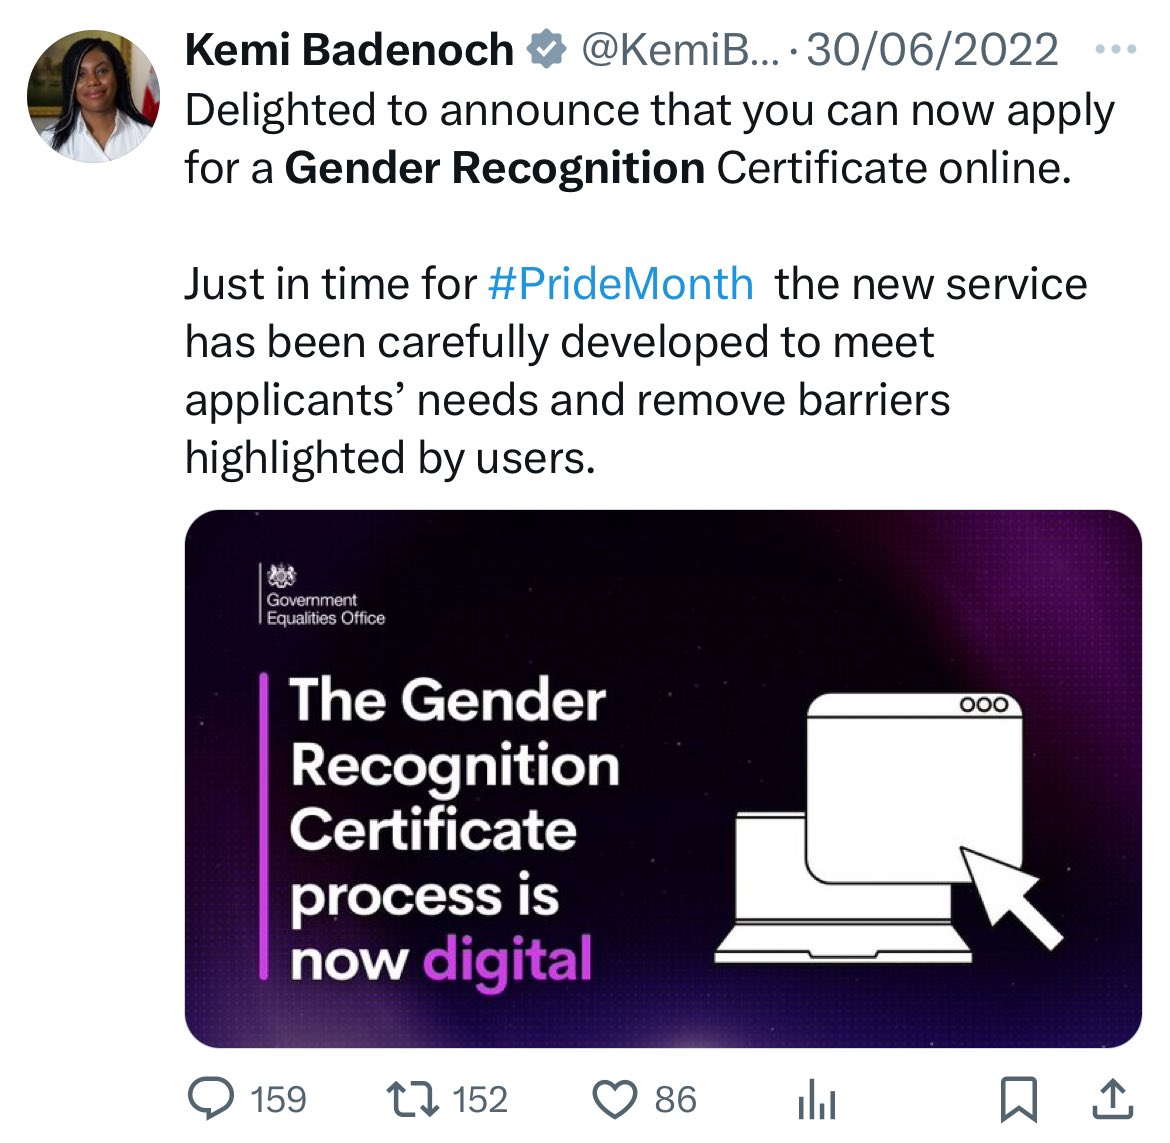 If you want to understand just how manufactured the transgender culture war is, less than 2 years ago Kemi Badenoch was celebrating the fact that it was becoming easier to apply for a Gender Recognition Certificate